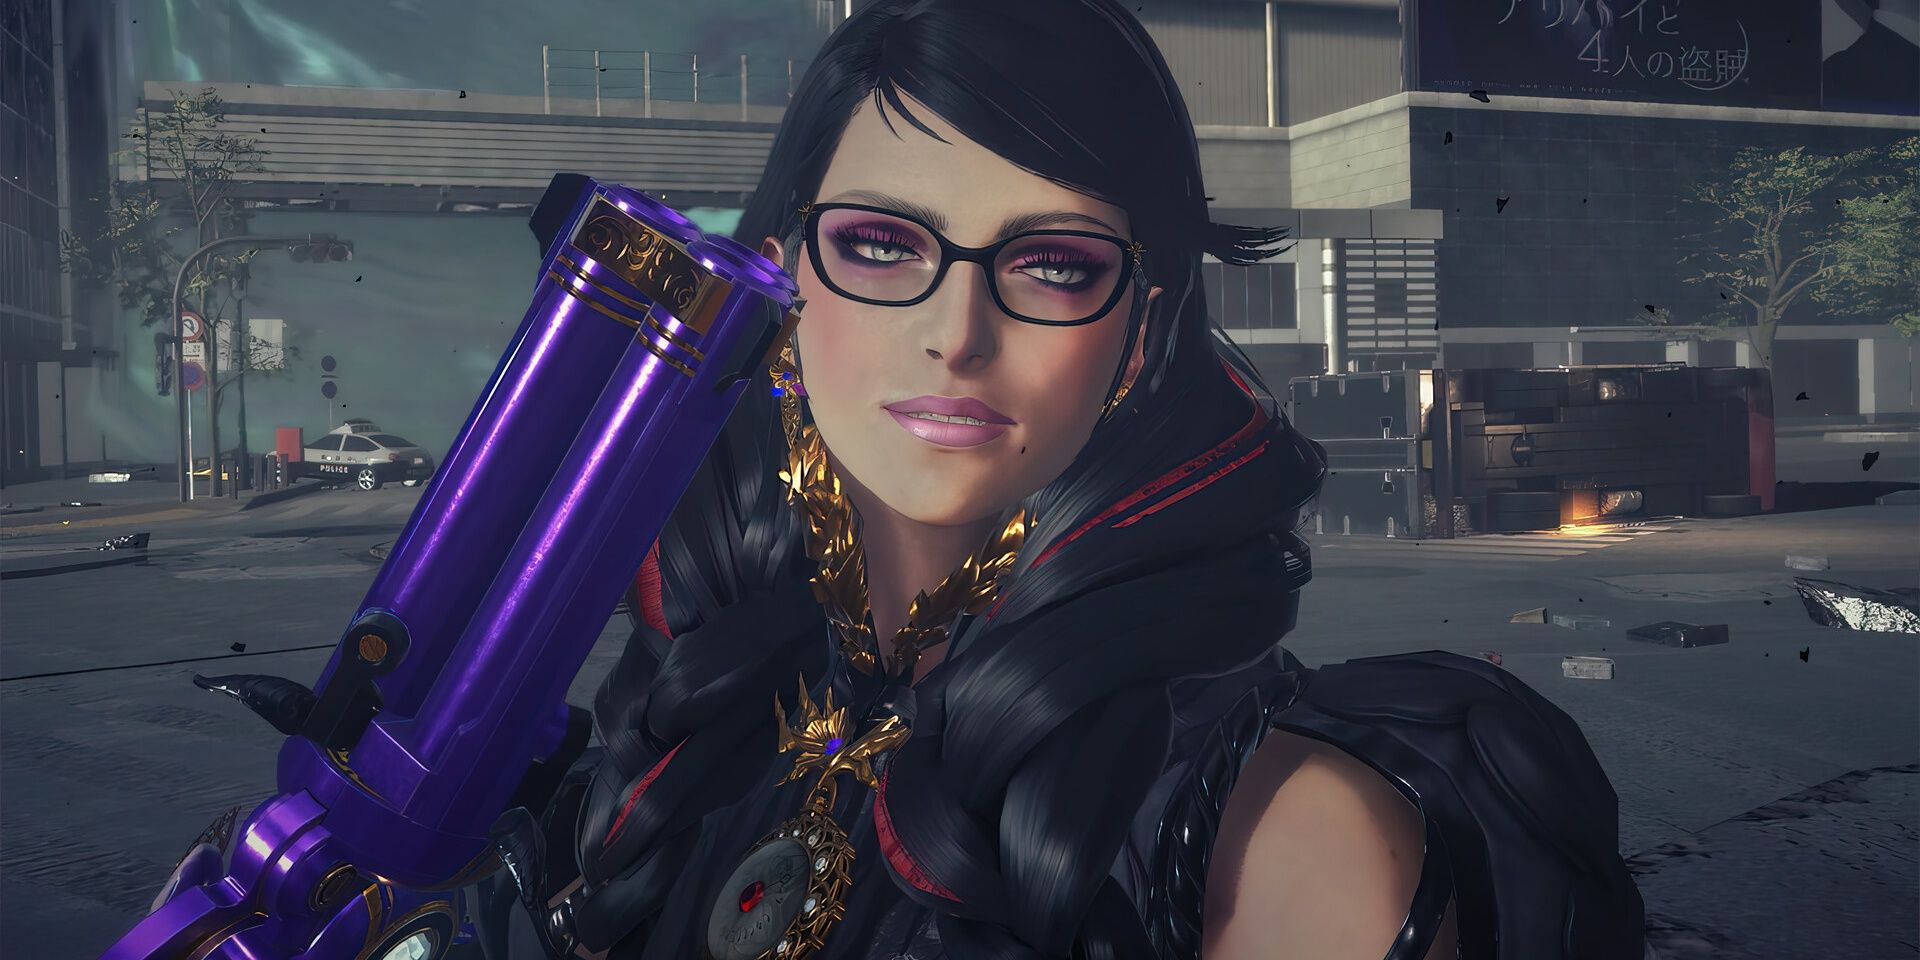 Image from Bayonetta 3 showing Cereza in her battle outfit holding a gun close to her face